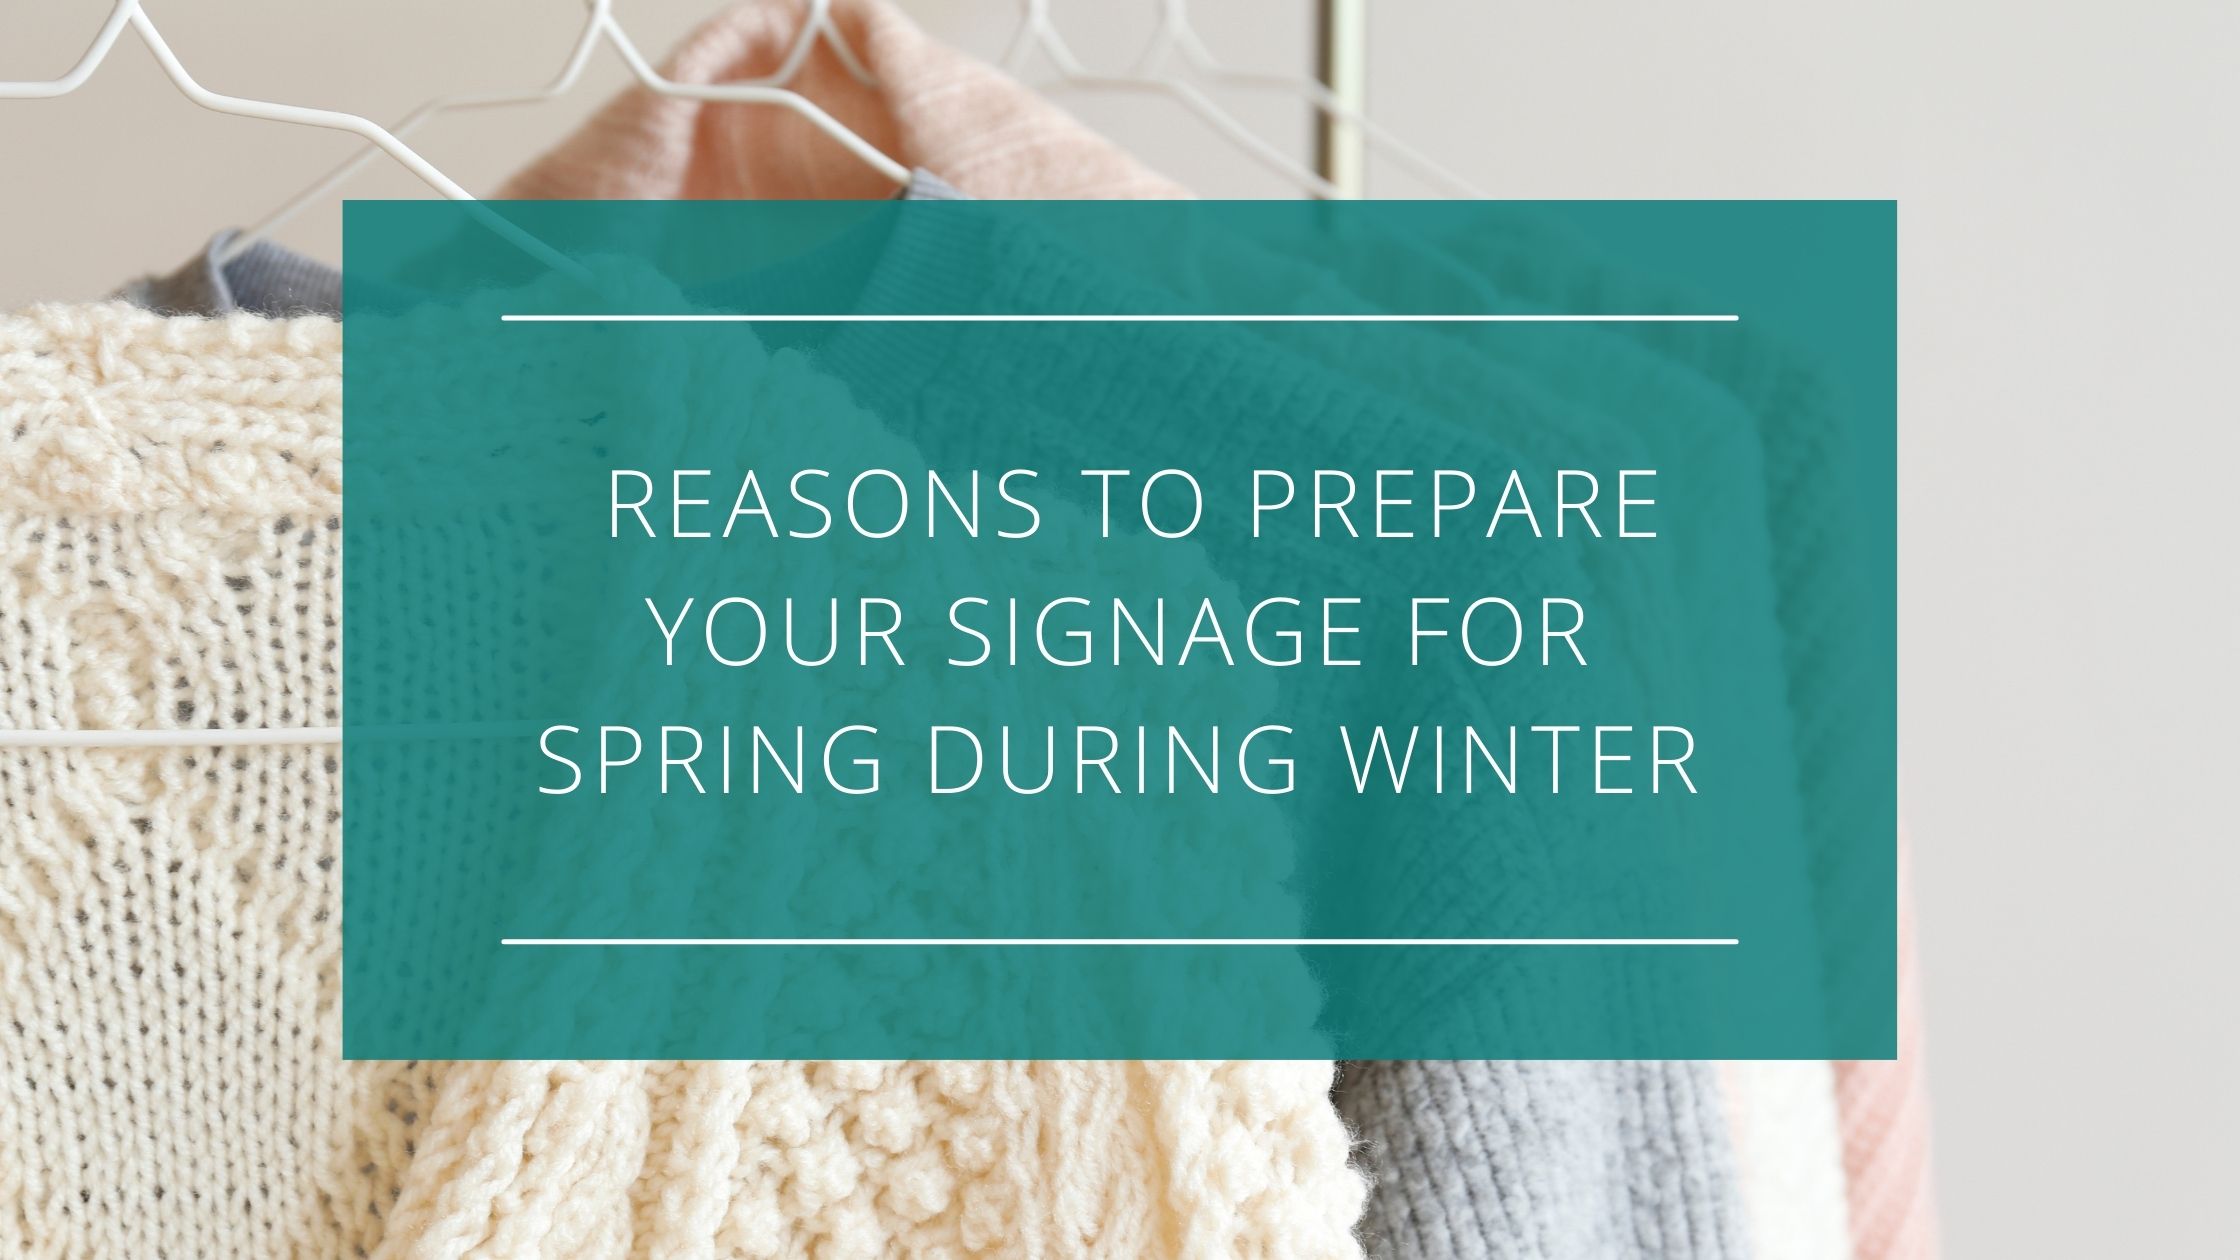 5 Reasons to Prepare Your Signage for Spring During Winter